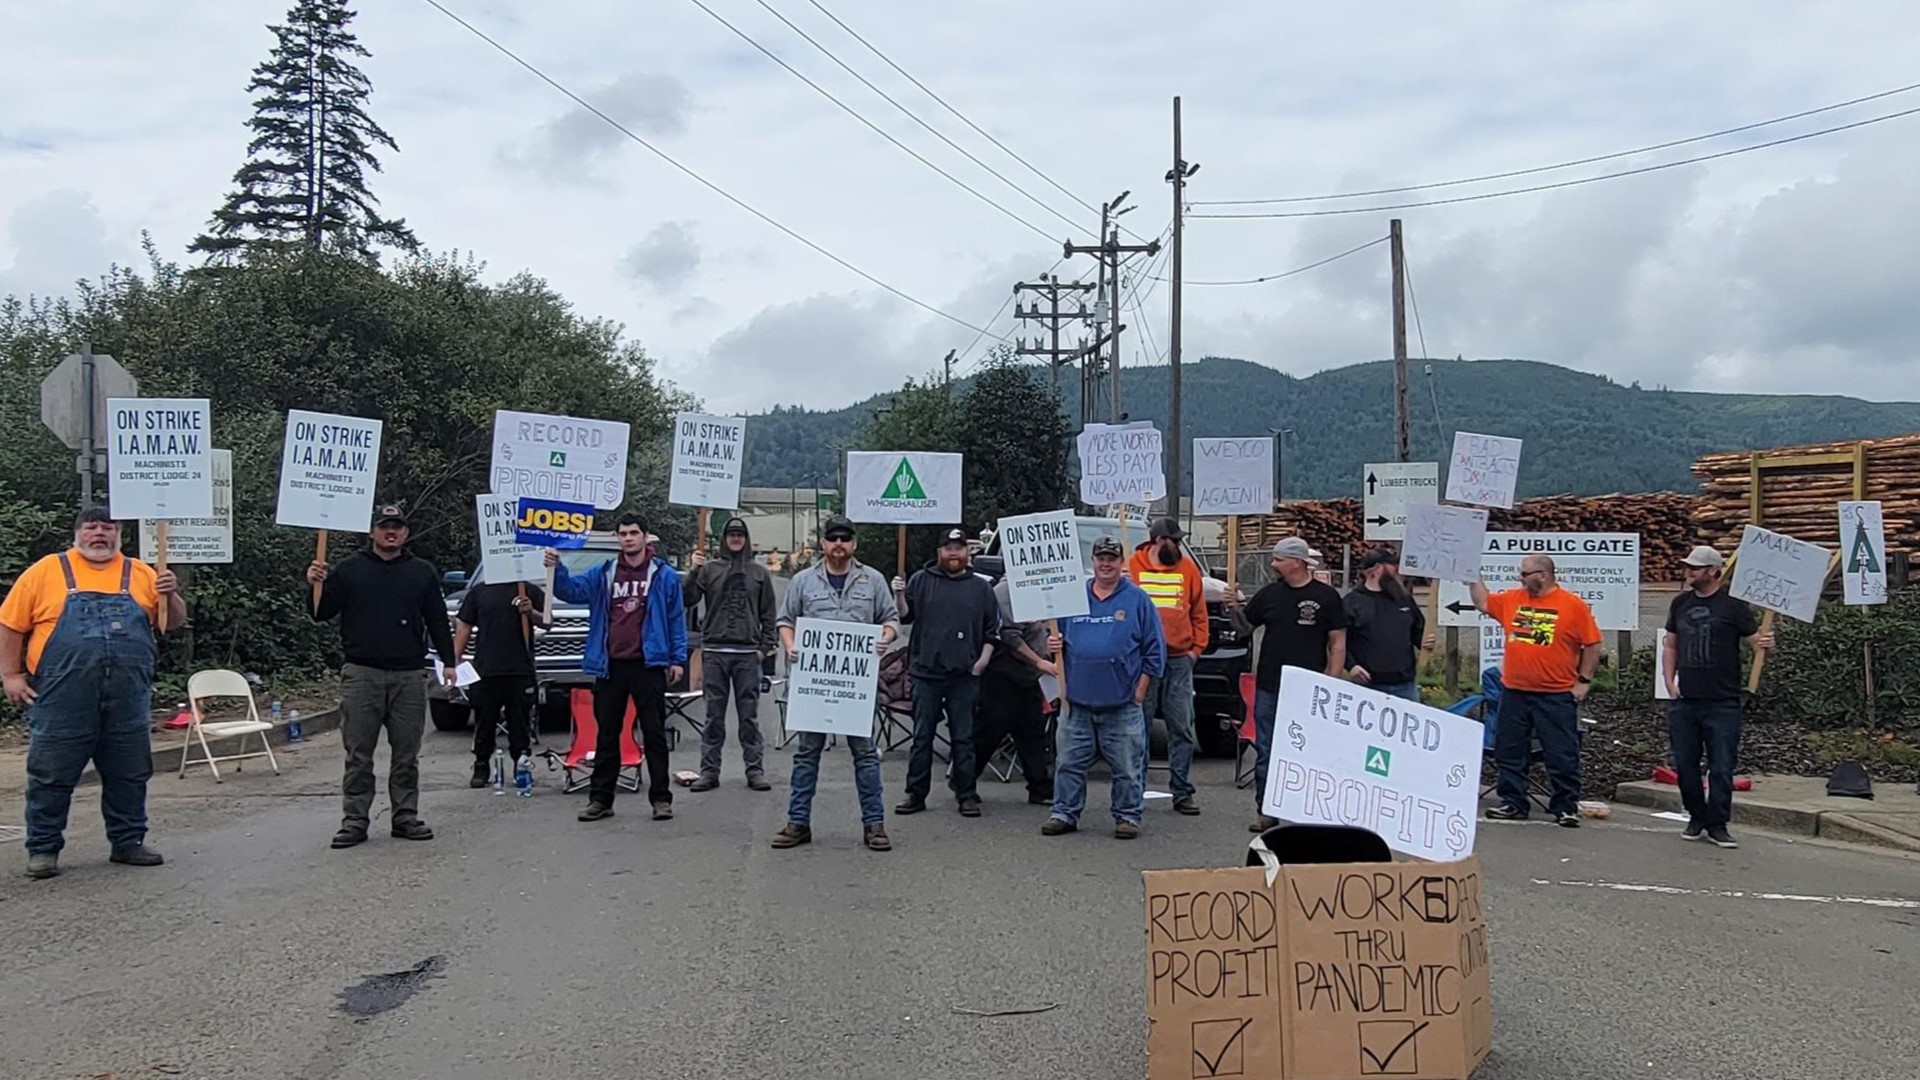 The Washington-based company announced a work stoppage involving members of the International Association of Machinists and Aerospace Workers union on Tuesday.